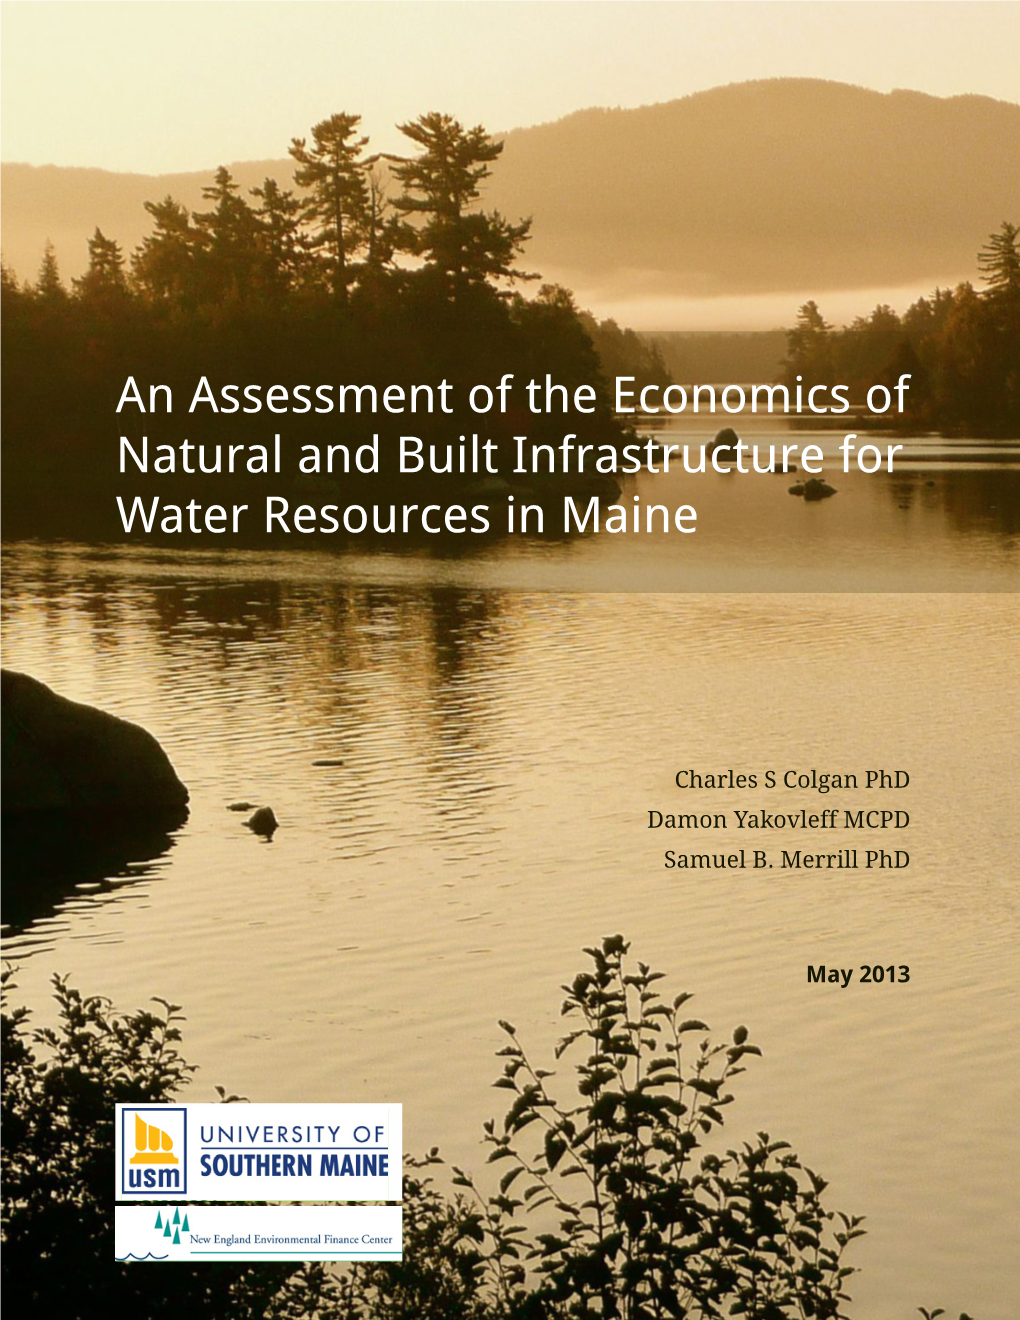 An Assessment of the Economics of Natural and Built Infrastructure for Water Resources in Maine